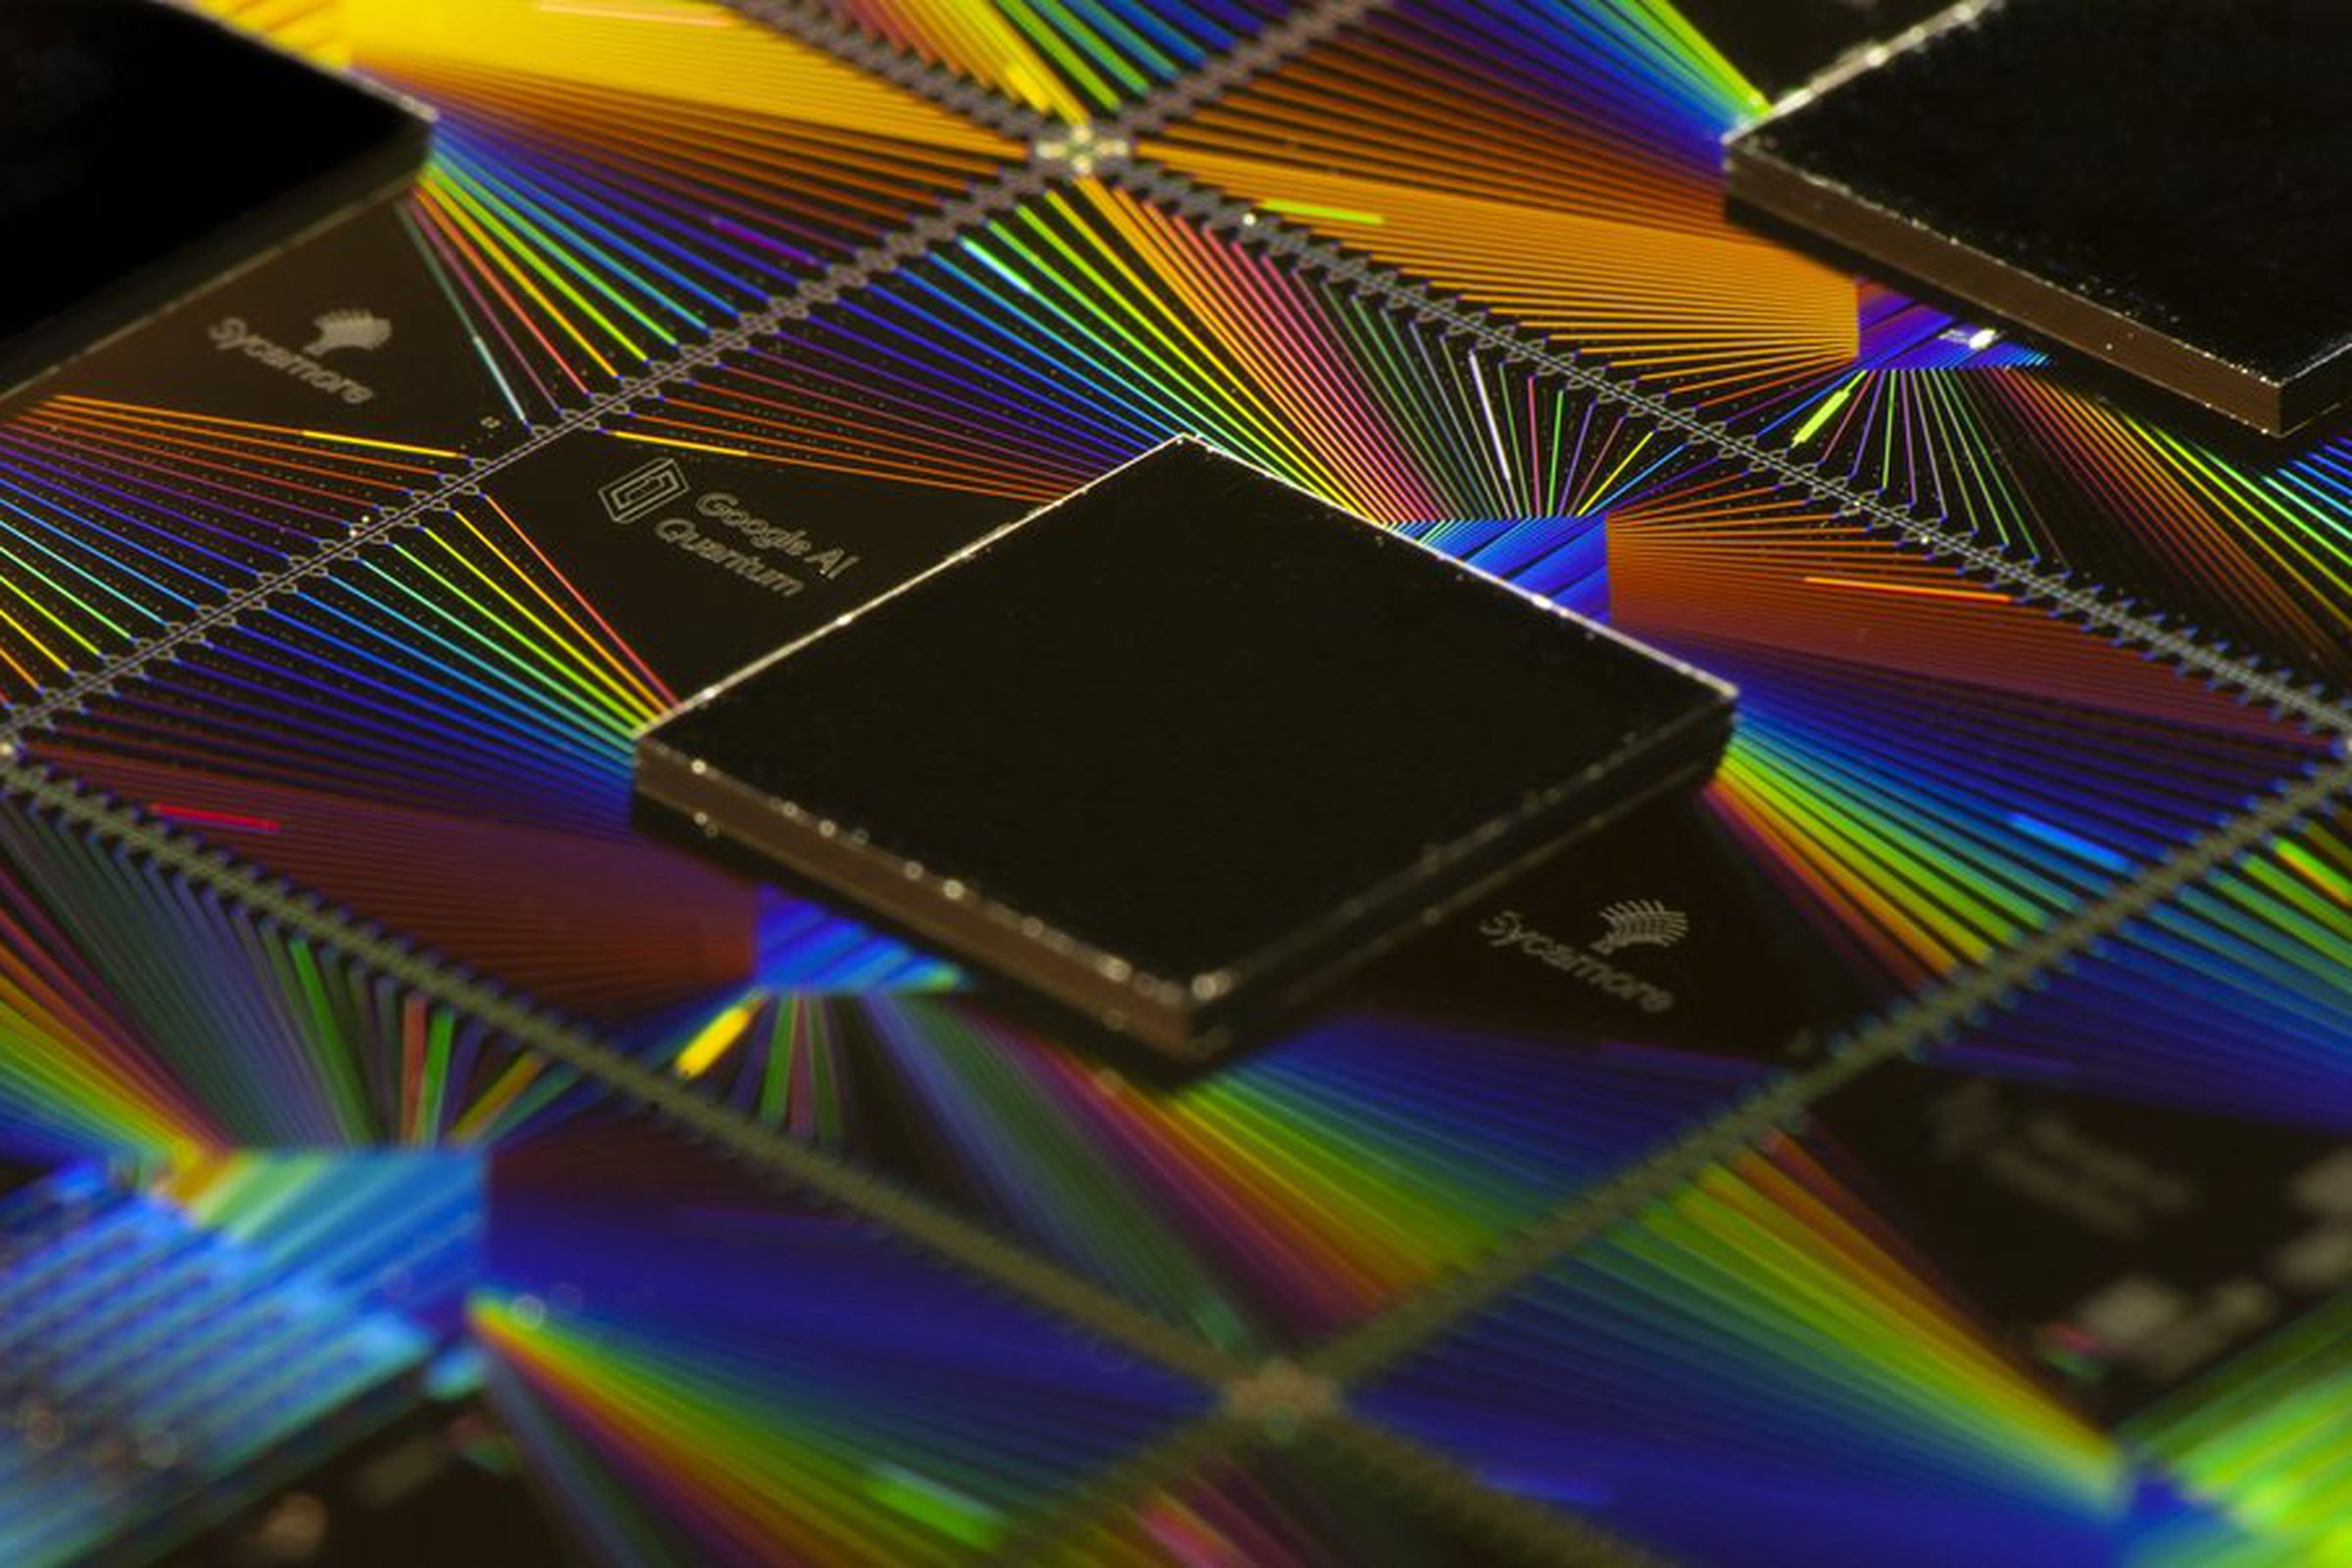 Google’s Sycamore quantum processor, which was behind the breakthrough.